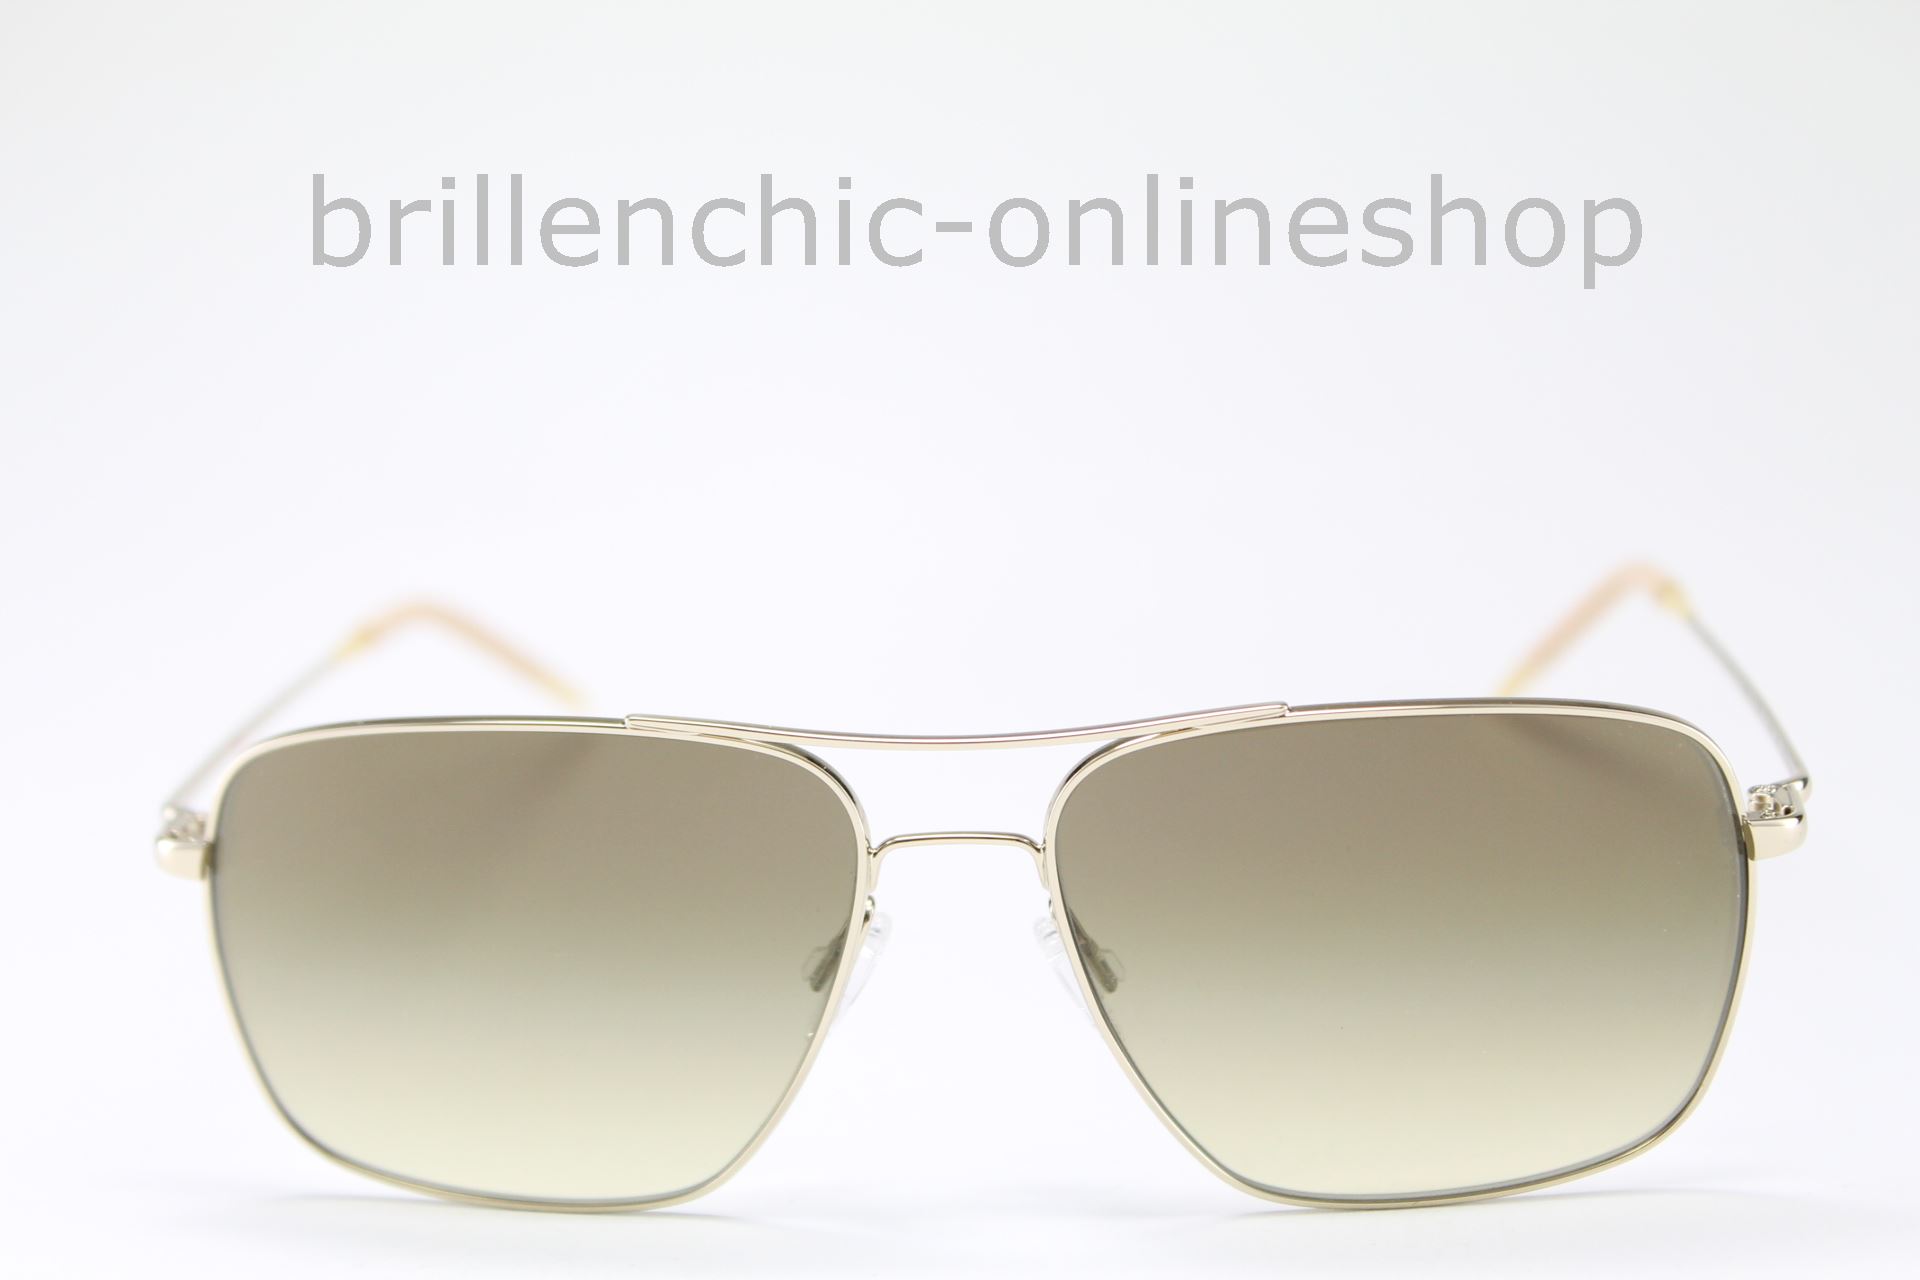 Brillenchic-onlineshop in Berlin - OLIVER PEOPLES CLIFTON OV 1150S 1150  5035/85 - PHOTOCROMIC 